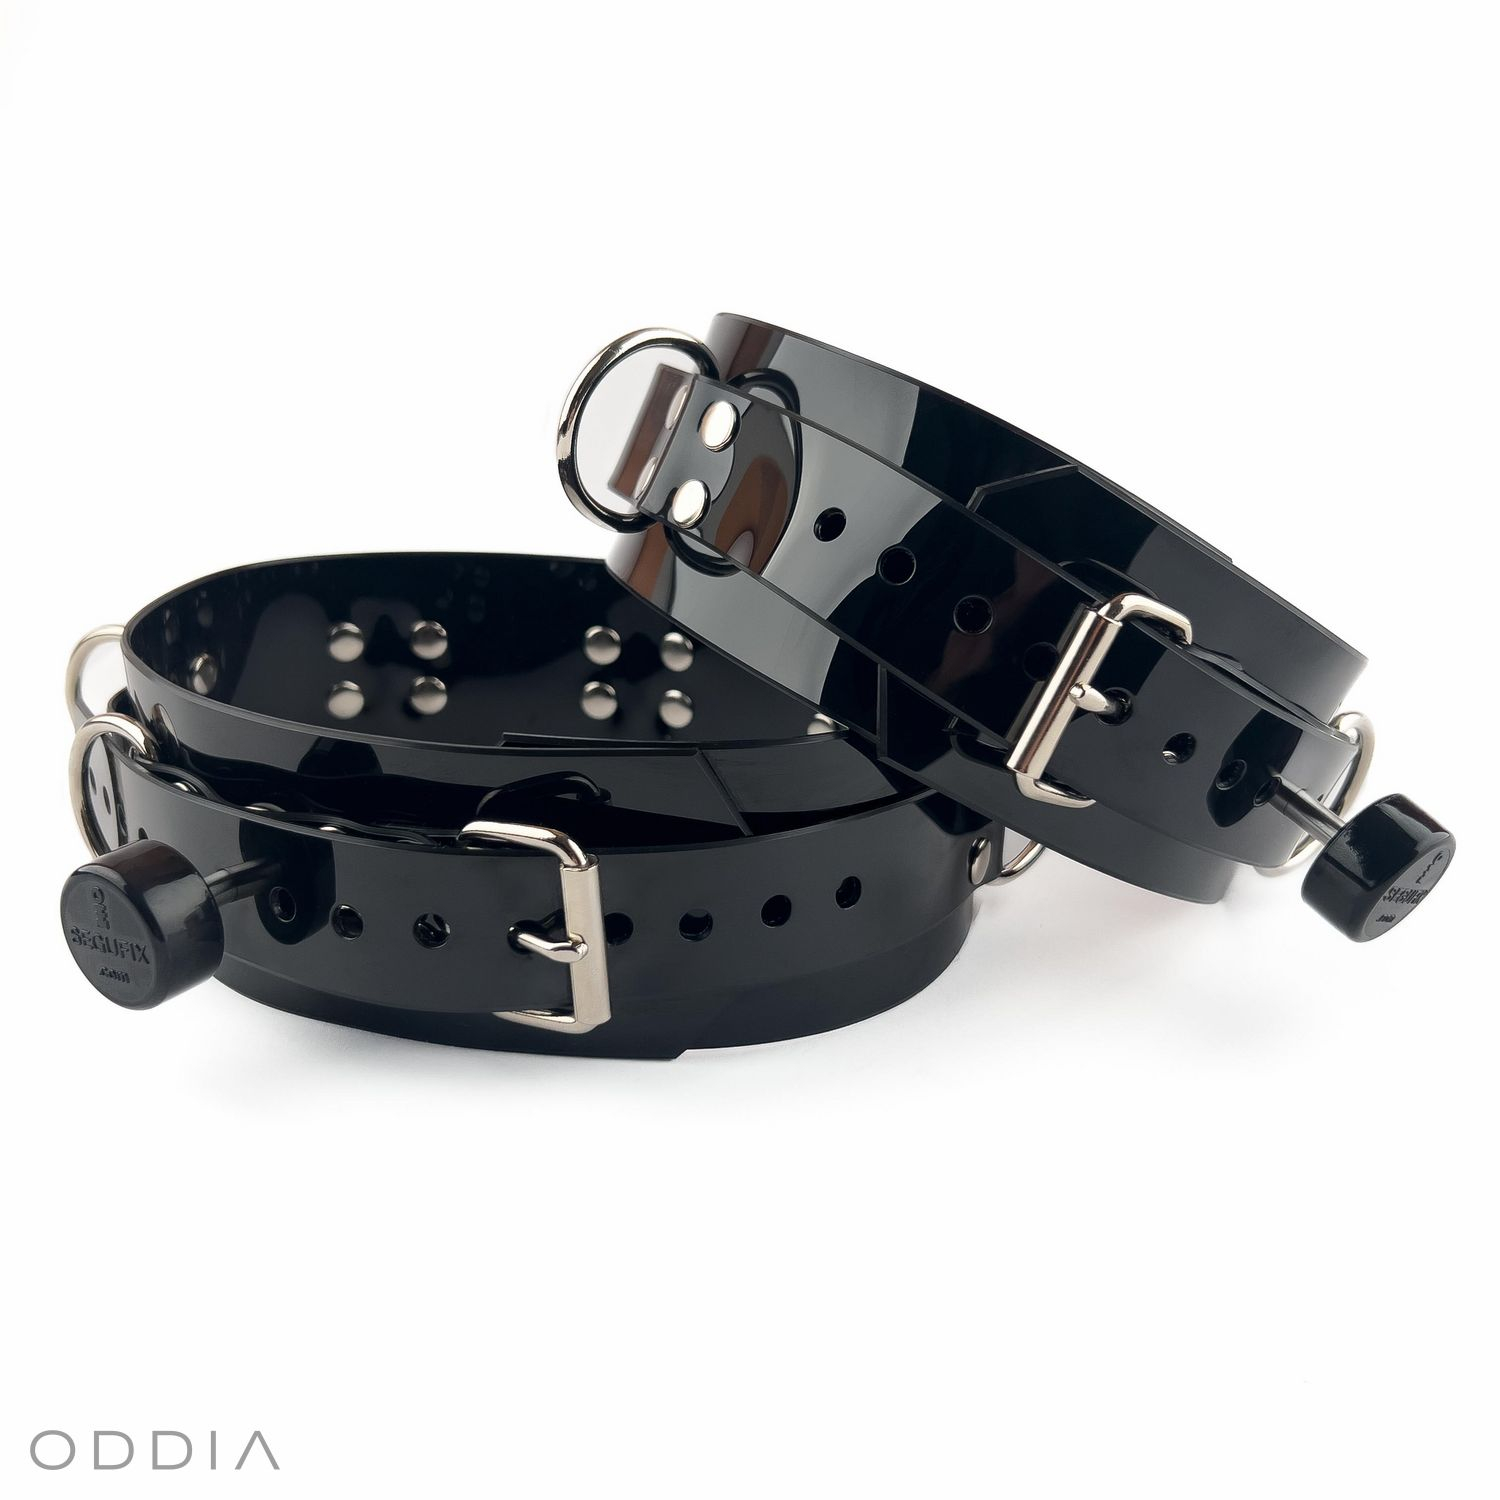 Black locking BDSM thigh restraints with Segufix magnetic locks and high-quality silver-colored metalwork.